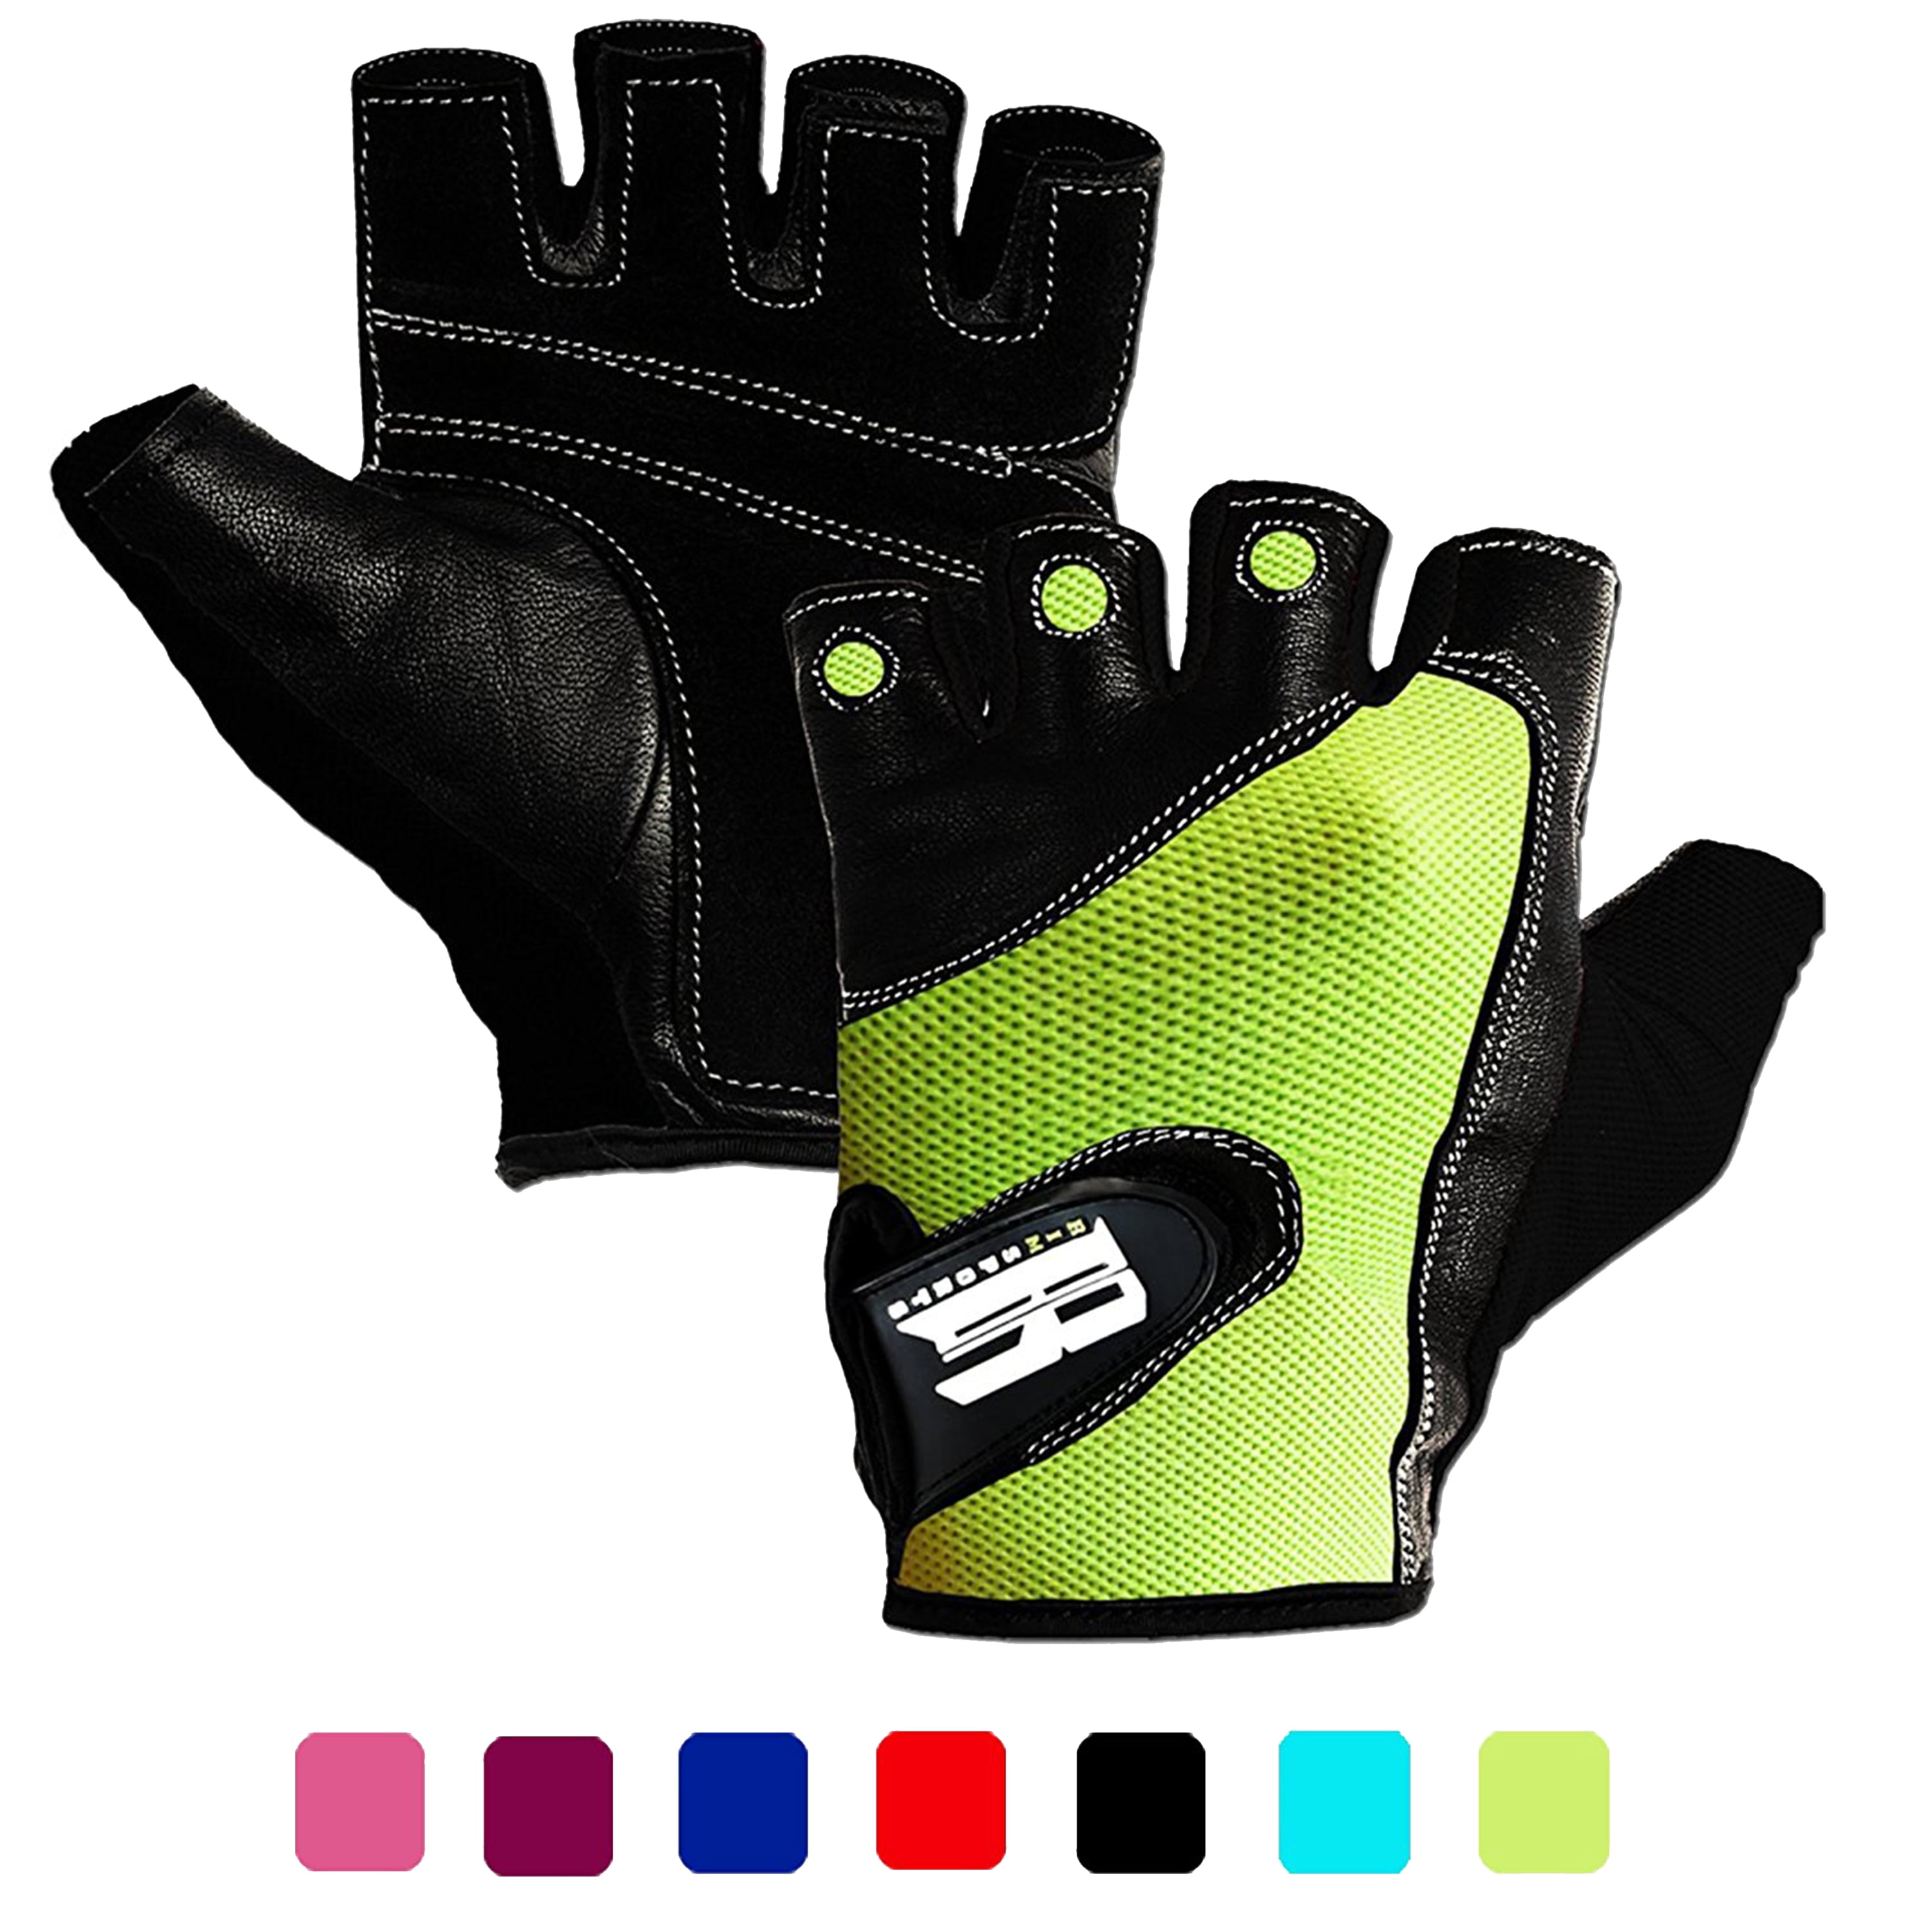 Leather Weight Lifting Fitness Gloves Half Finger Grip Padded Workout Gym Glove 